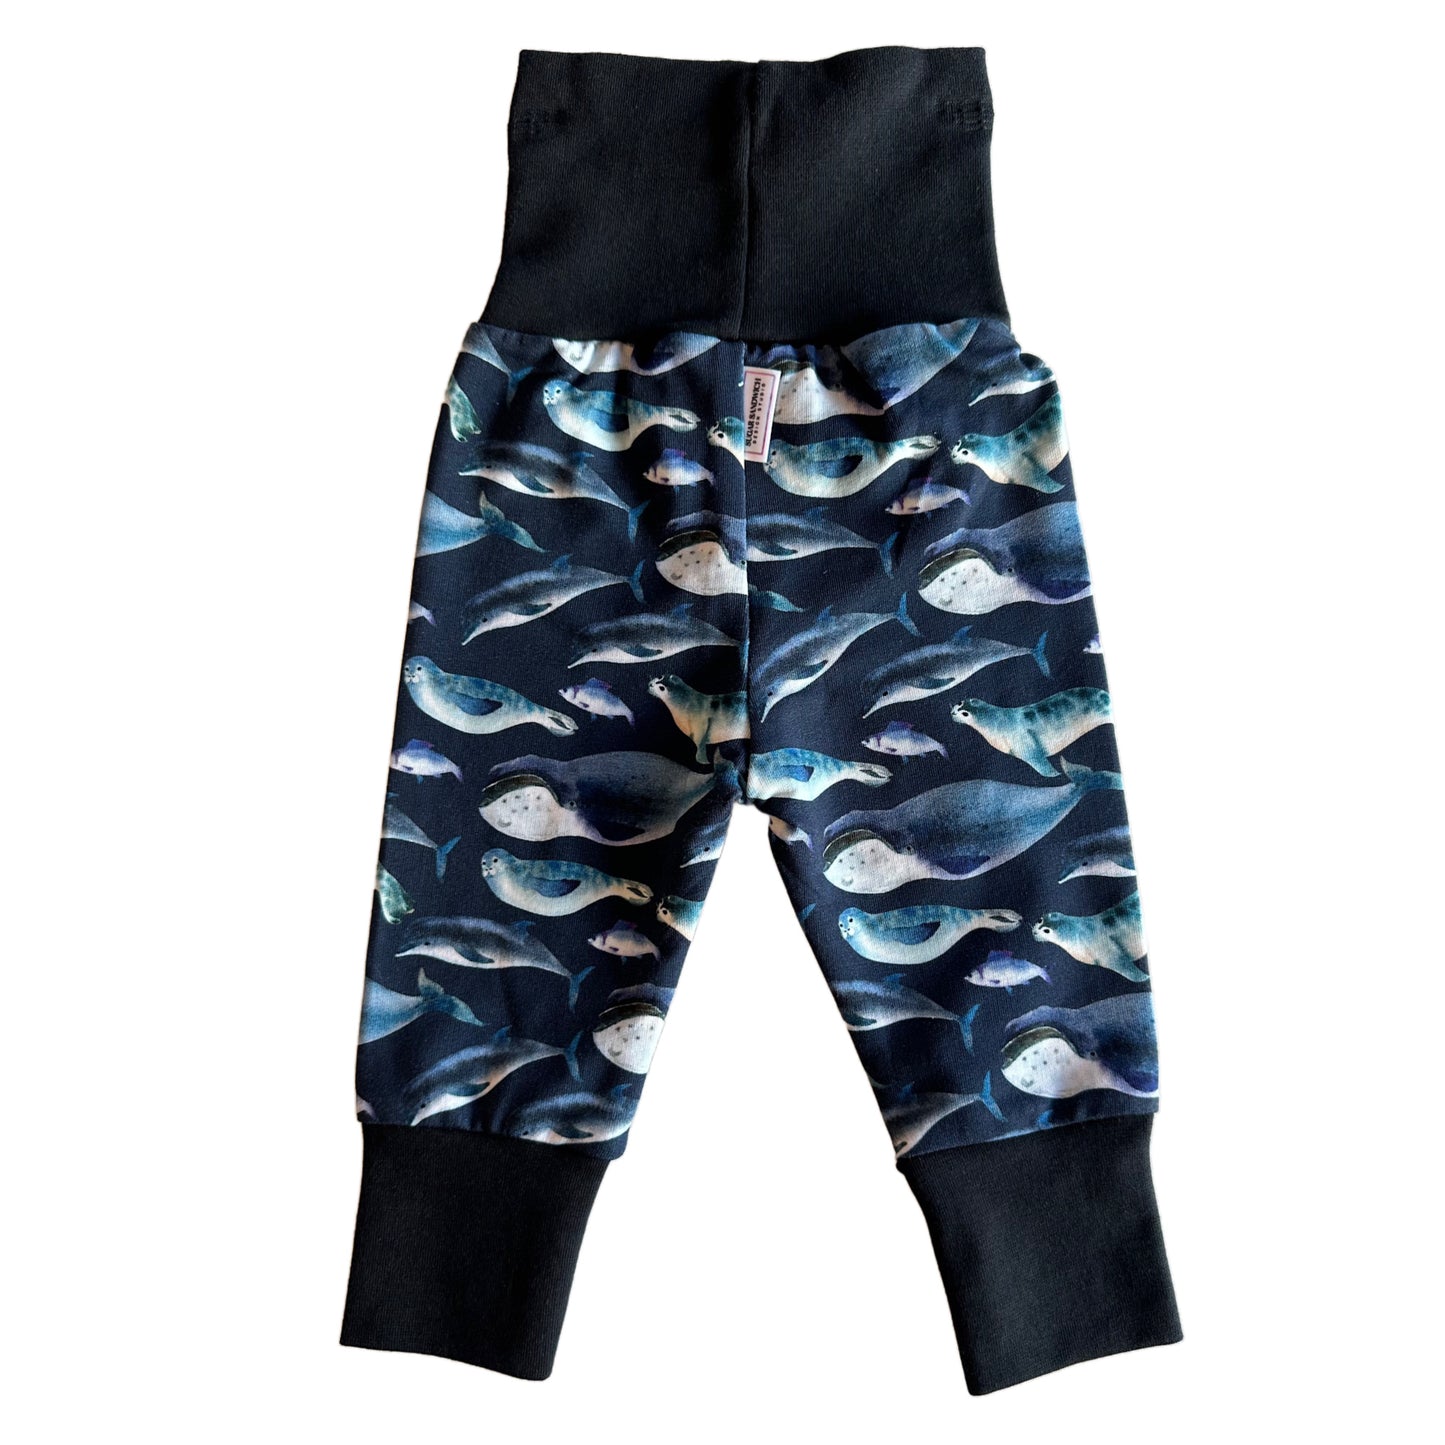 Whales and Seals Growth Spurt Jogger Pants